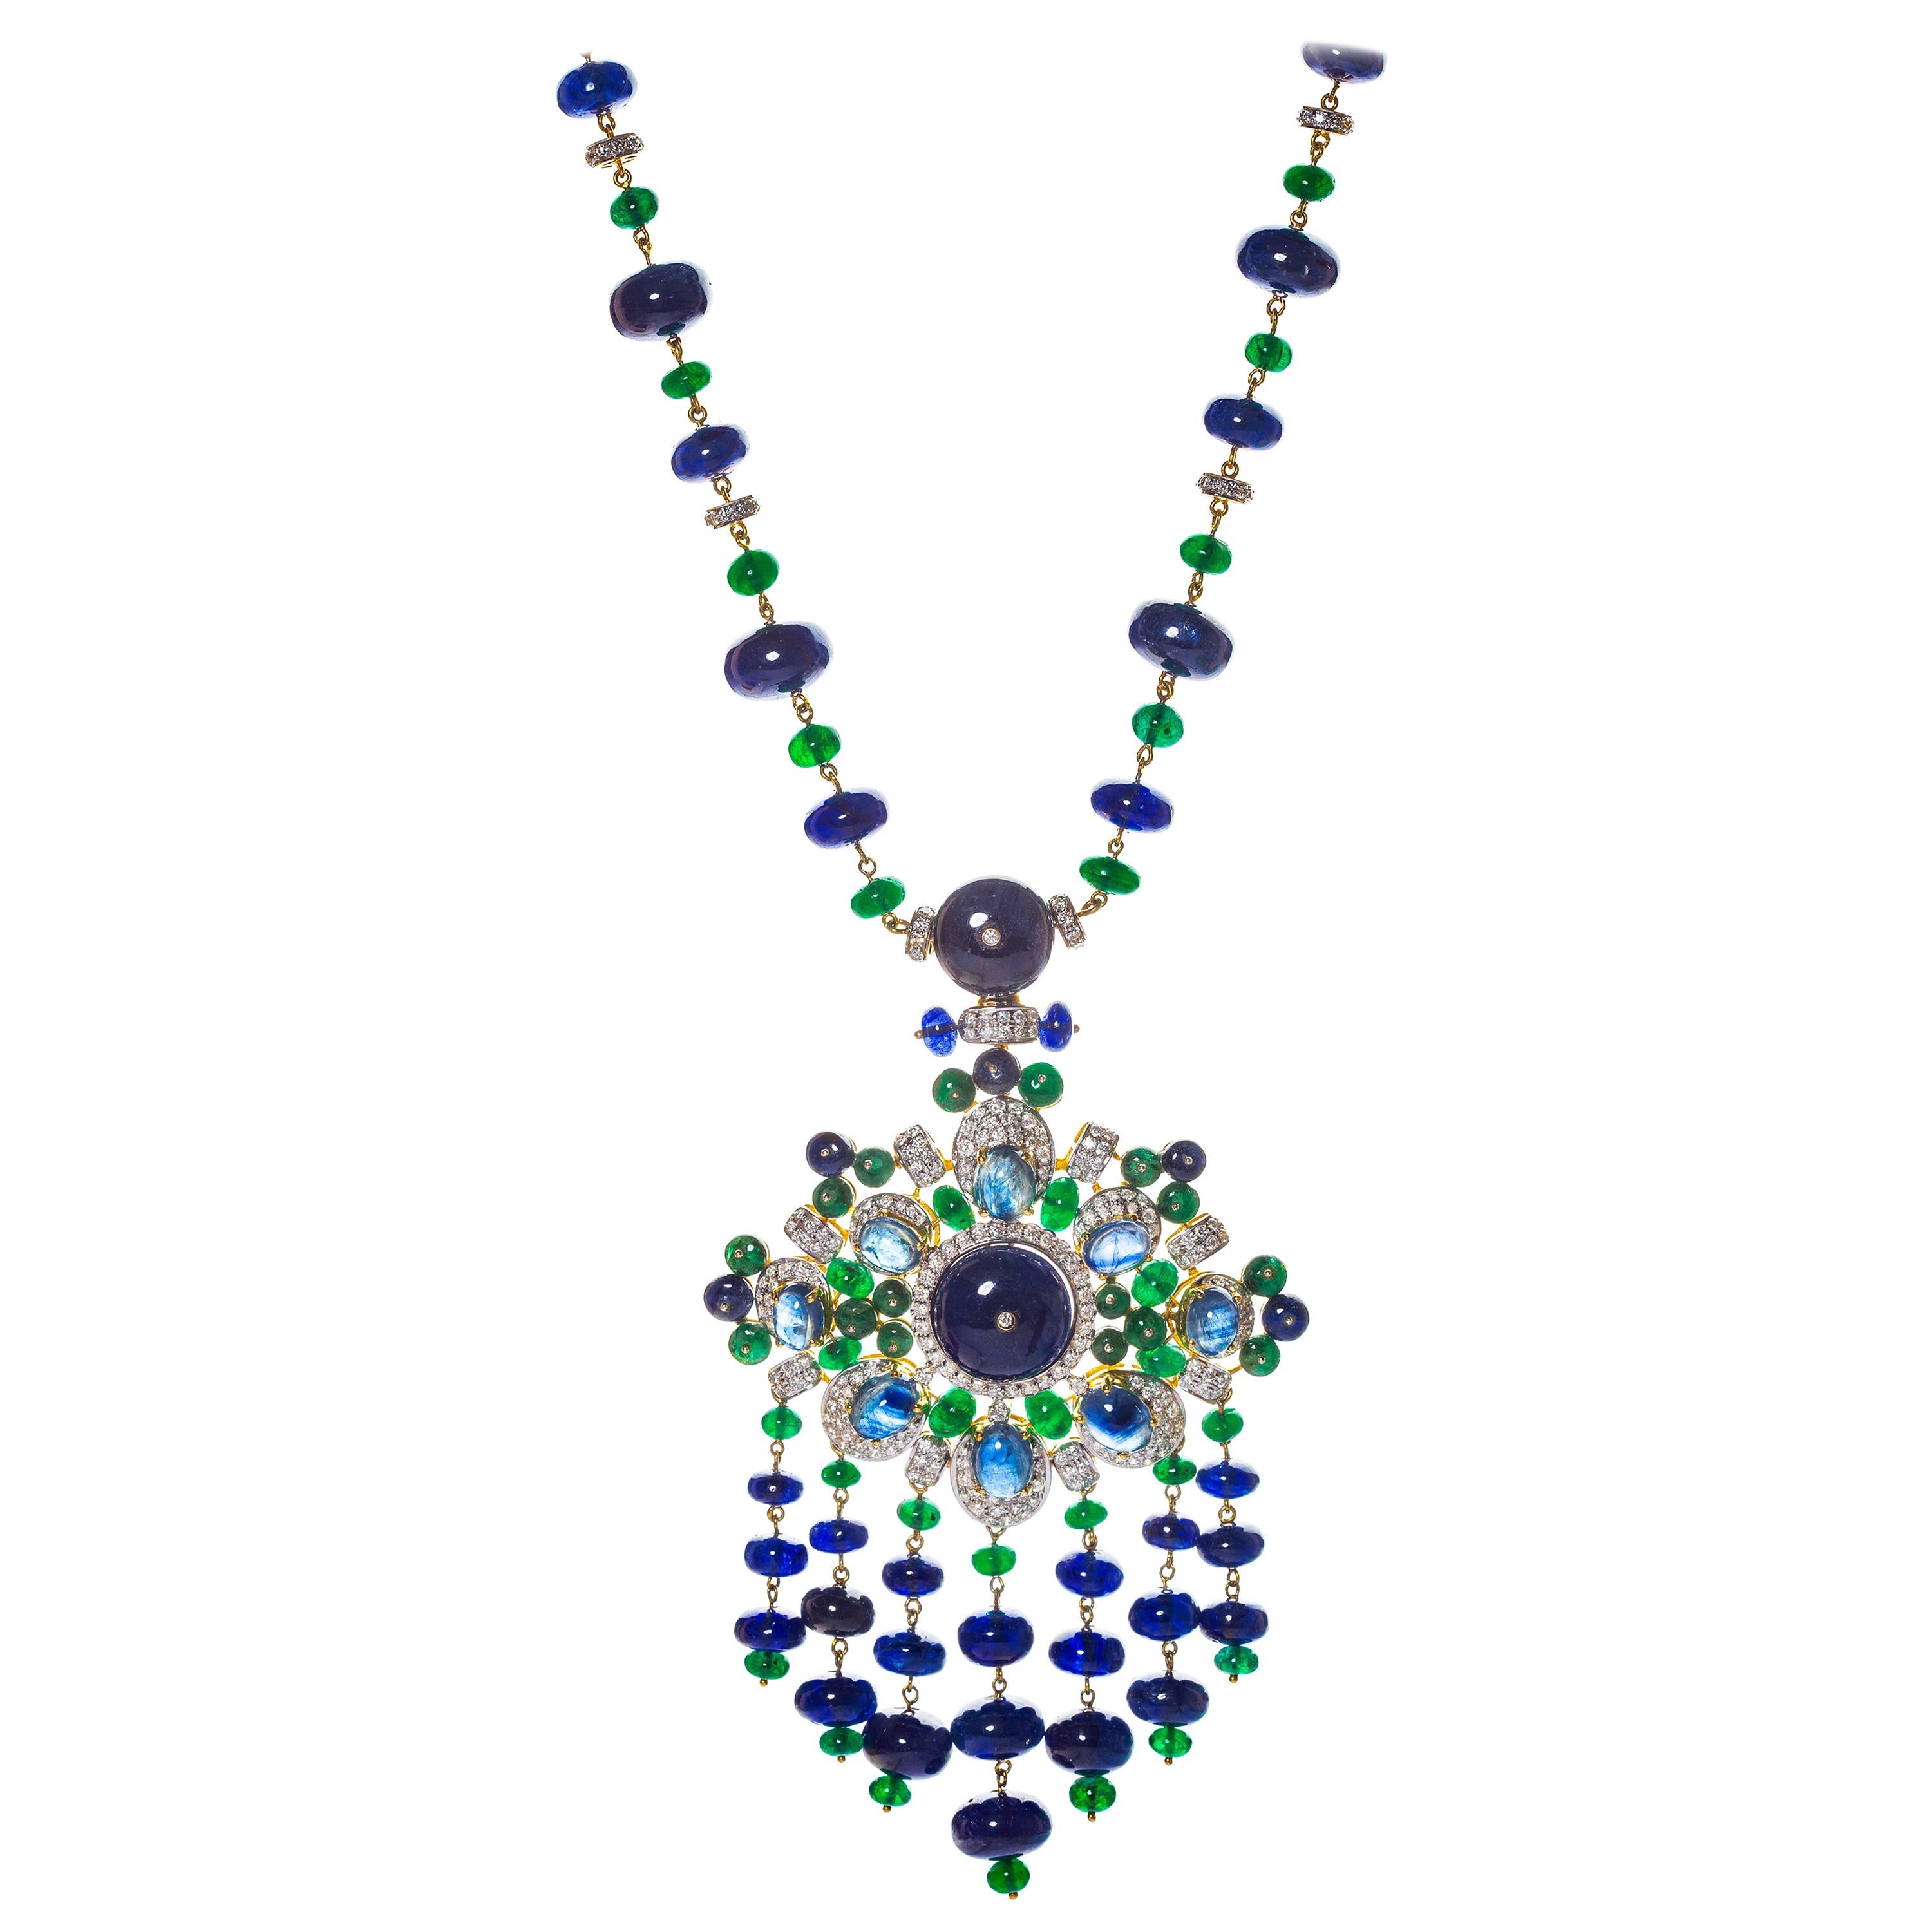 Peacock Necklace in 18 Karat Gold, Emeralds, Blue Sapphires and Diamonds